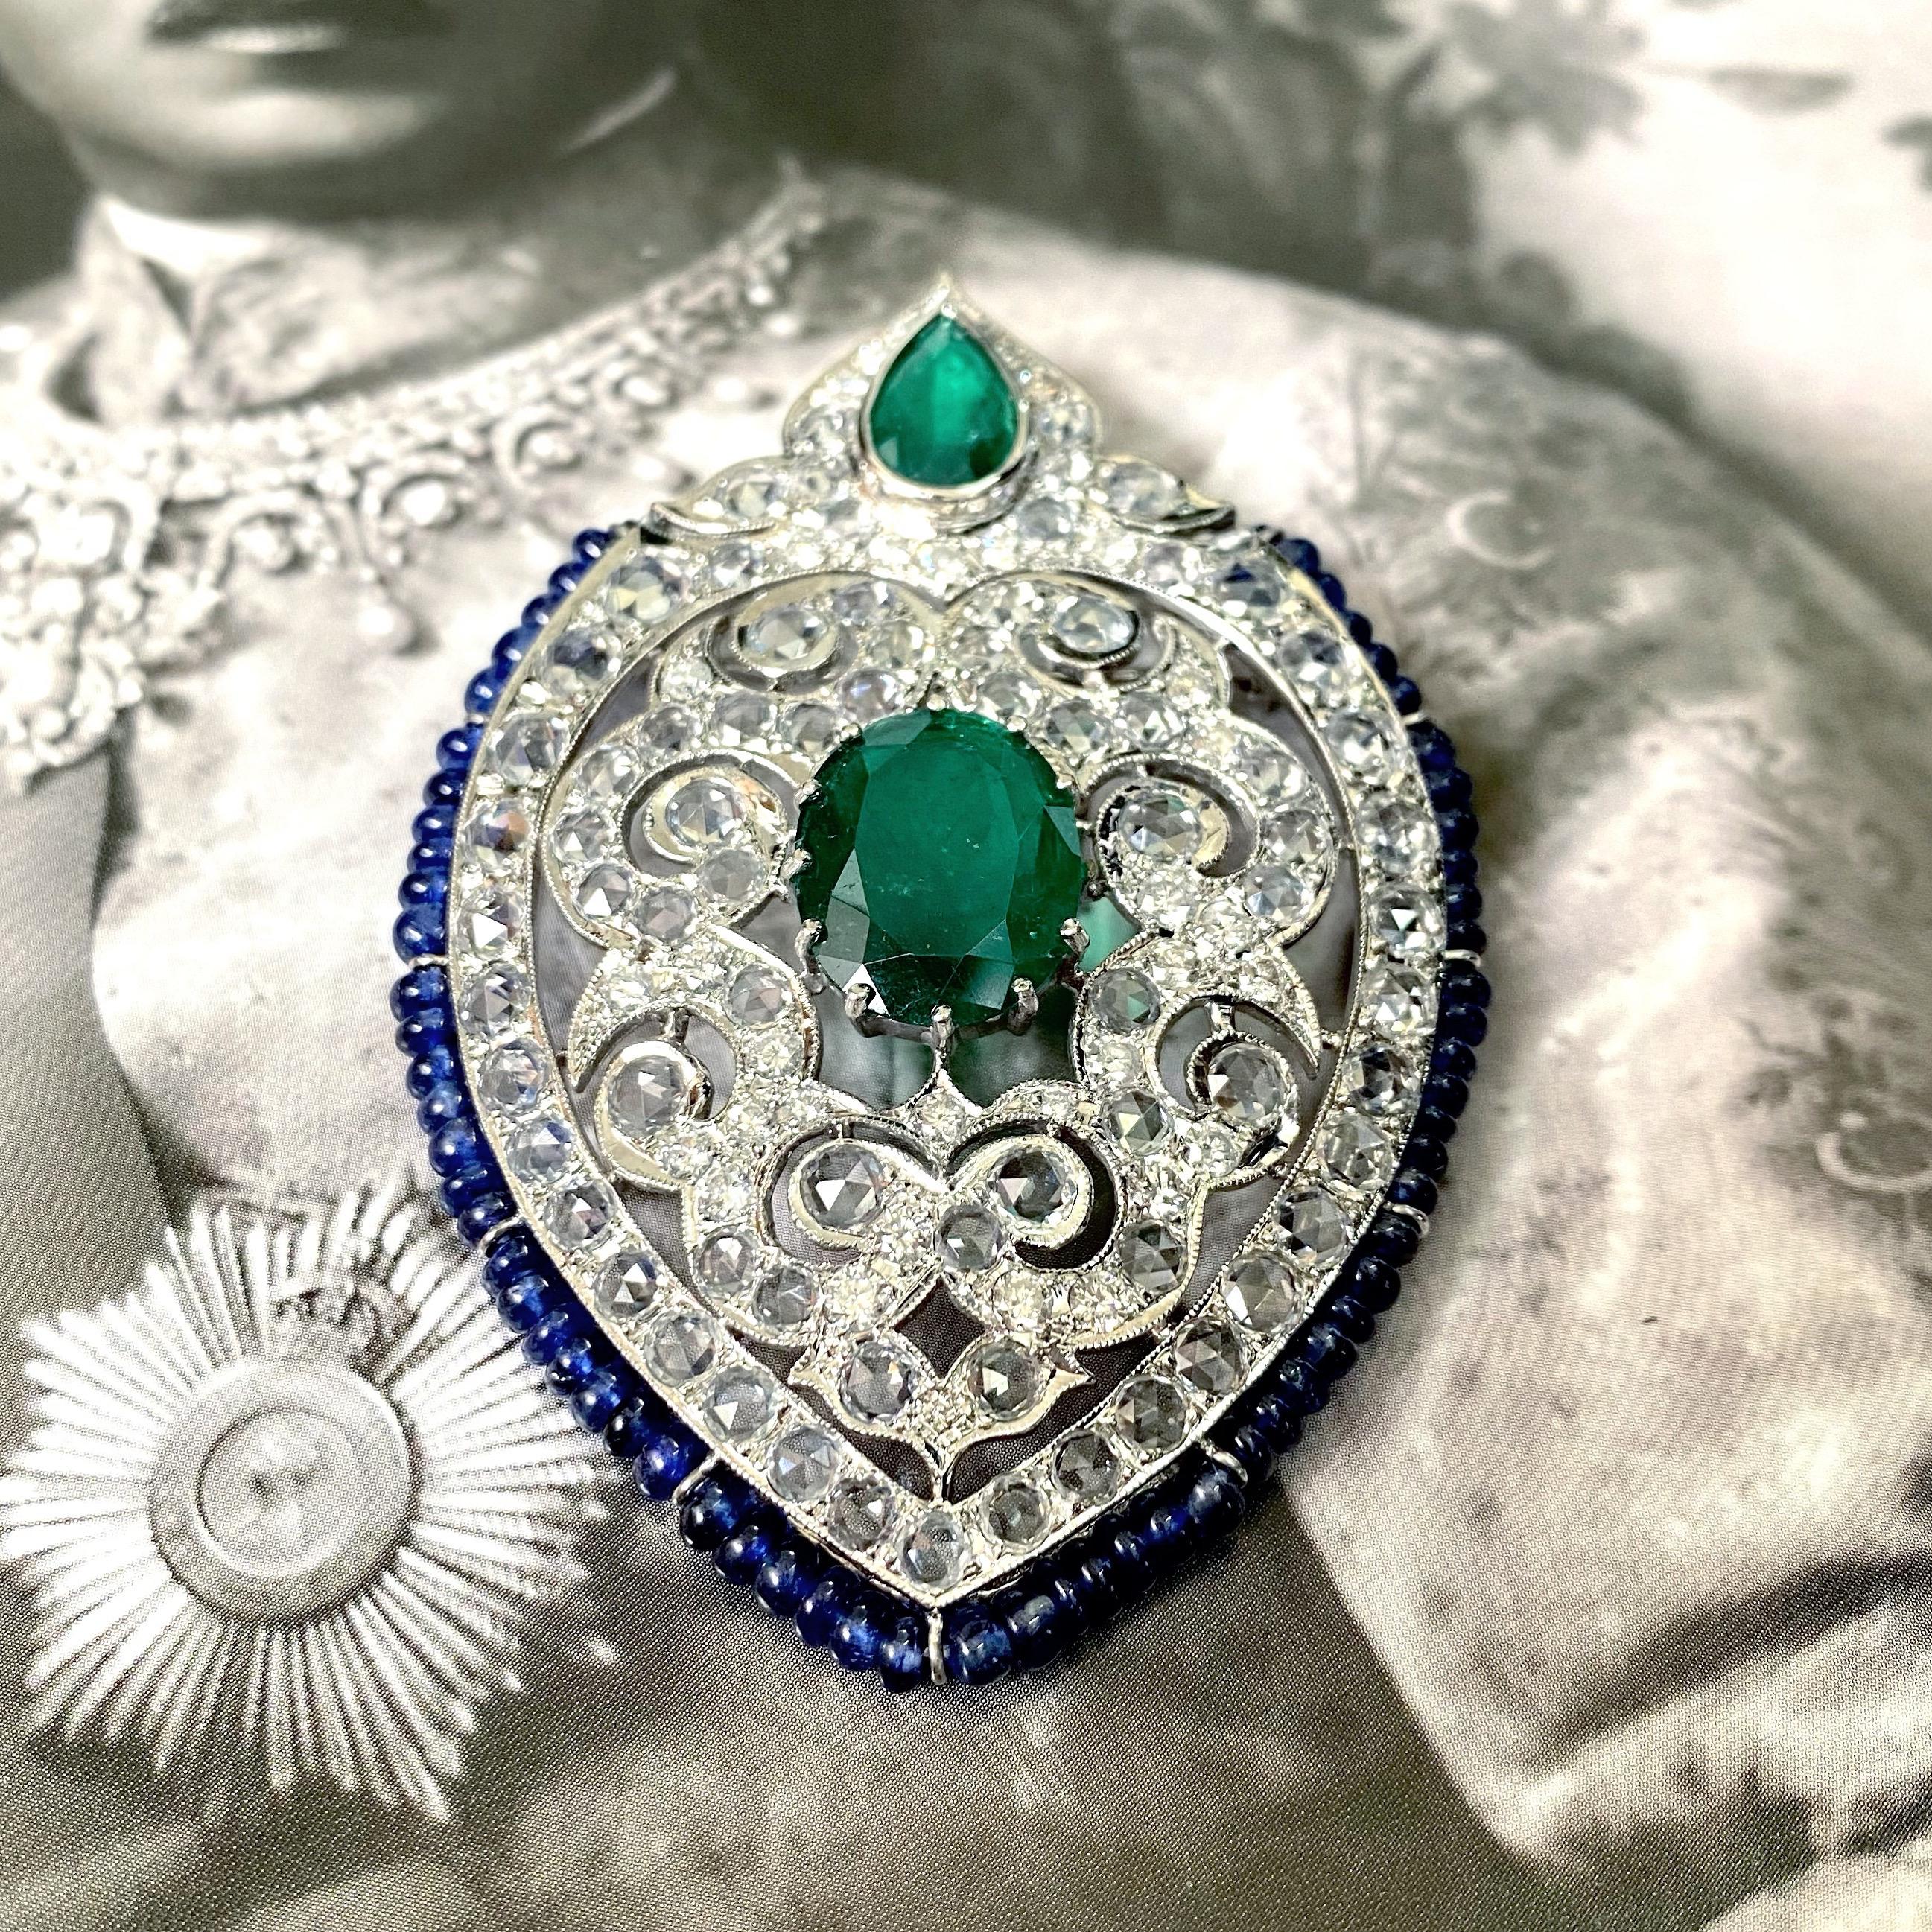 A stunning art-deco brooch, with Zambian Emeralds, Blue Sapphire beads, rose-cut White Sapphires and Diamonds - all set in solid 18K White Gold. The size of the brooch is around 7cm x 4.5cm. The Emeralds are natural, with great vivid green color and